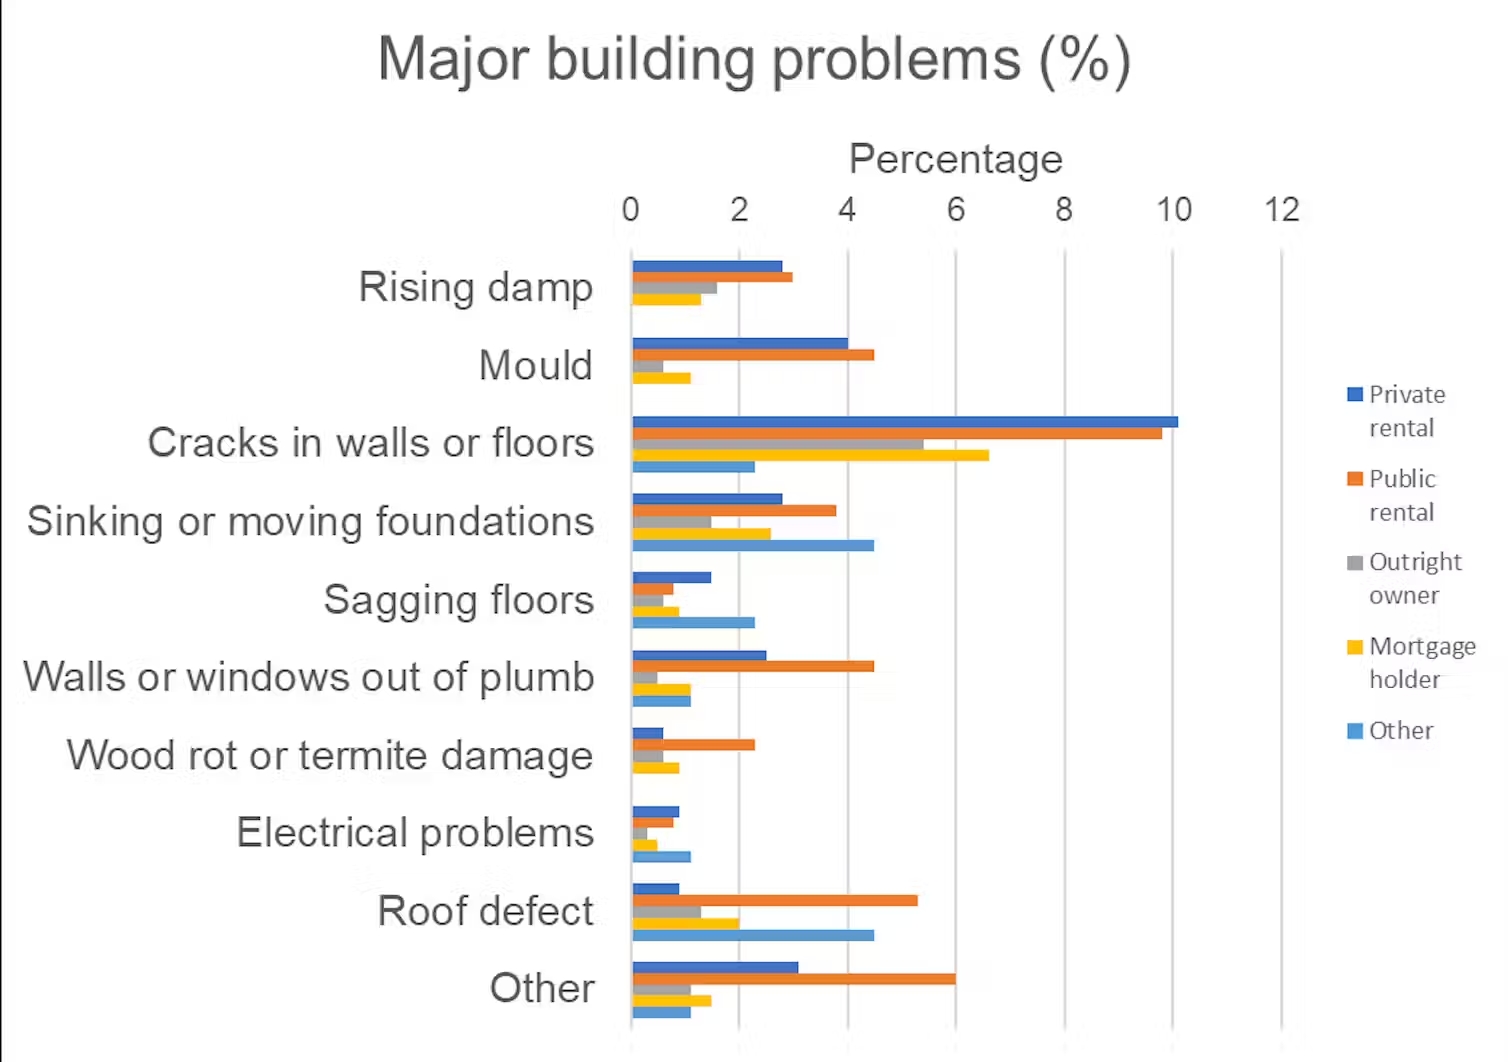 A bar chart showing proportions of major building problems, from rising damp and mould to roof defects